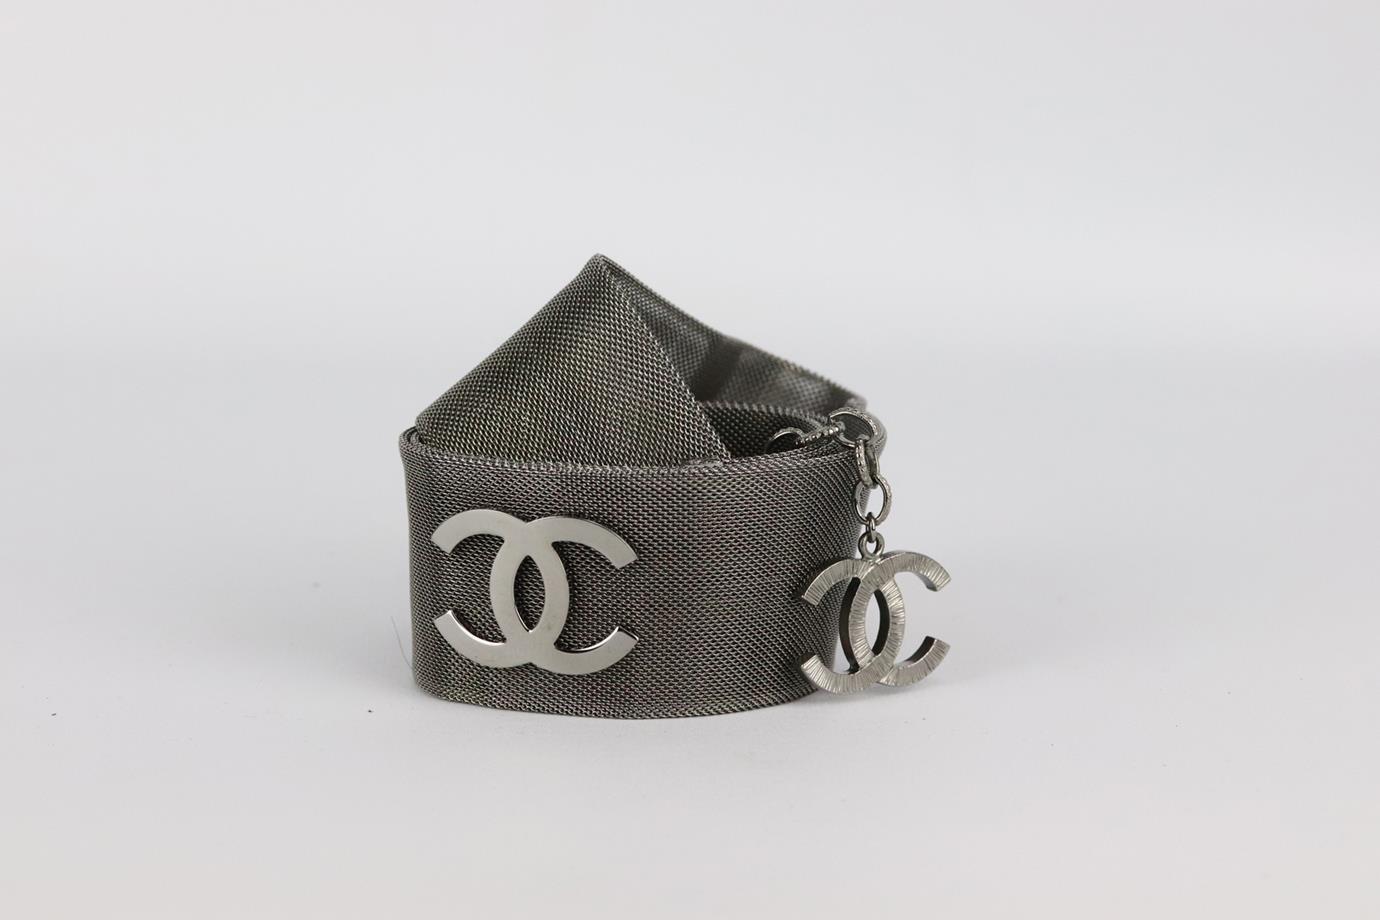 Chanel 2017 cc detailed chainmail waist belt. Silver. Lobster clasp fastening at back. Does not come with dustbag or box. Min. Length: 29 in. Max. Length: 34 in. Width: 1.6 in. Very good condition - No sign of wear; see pictures.